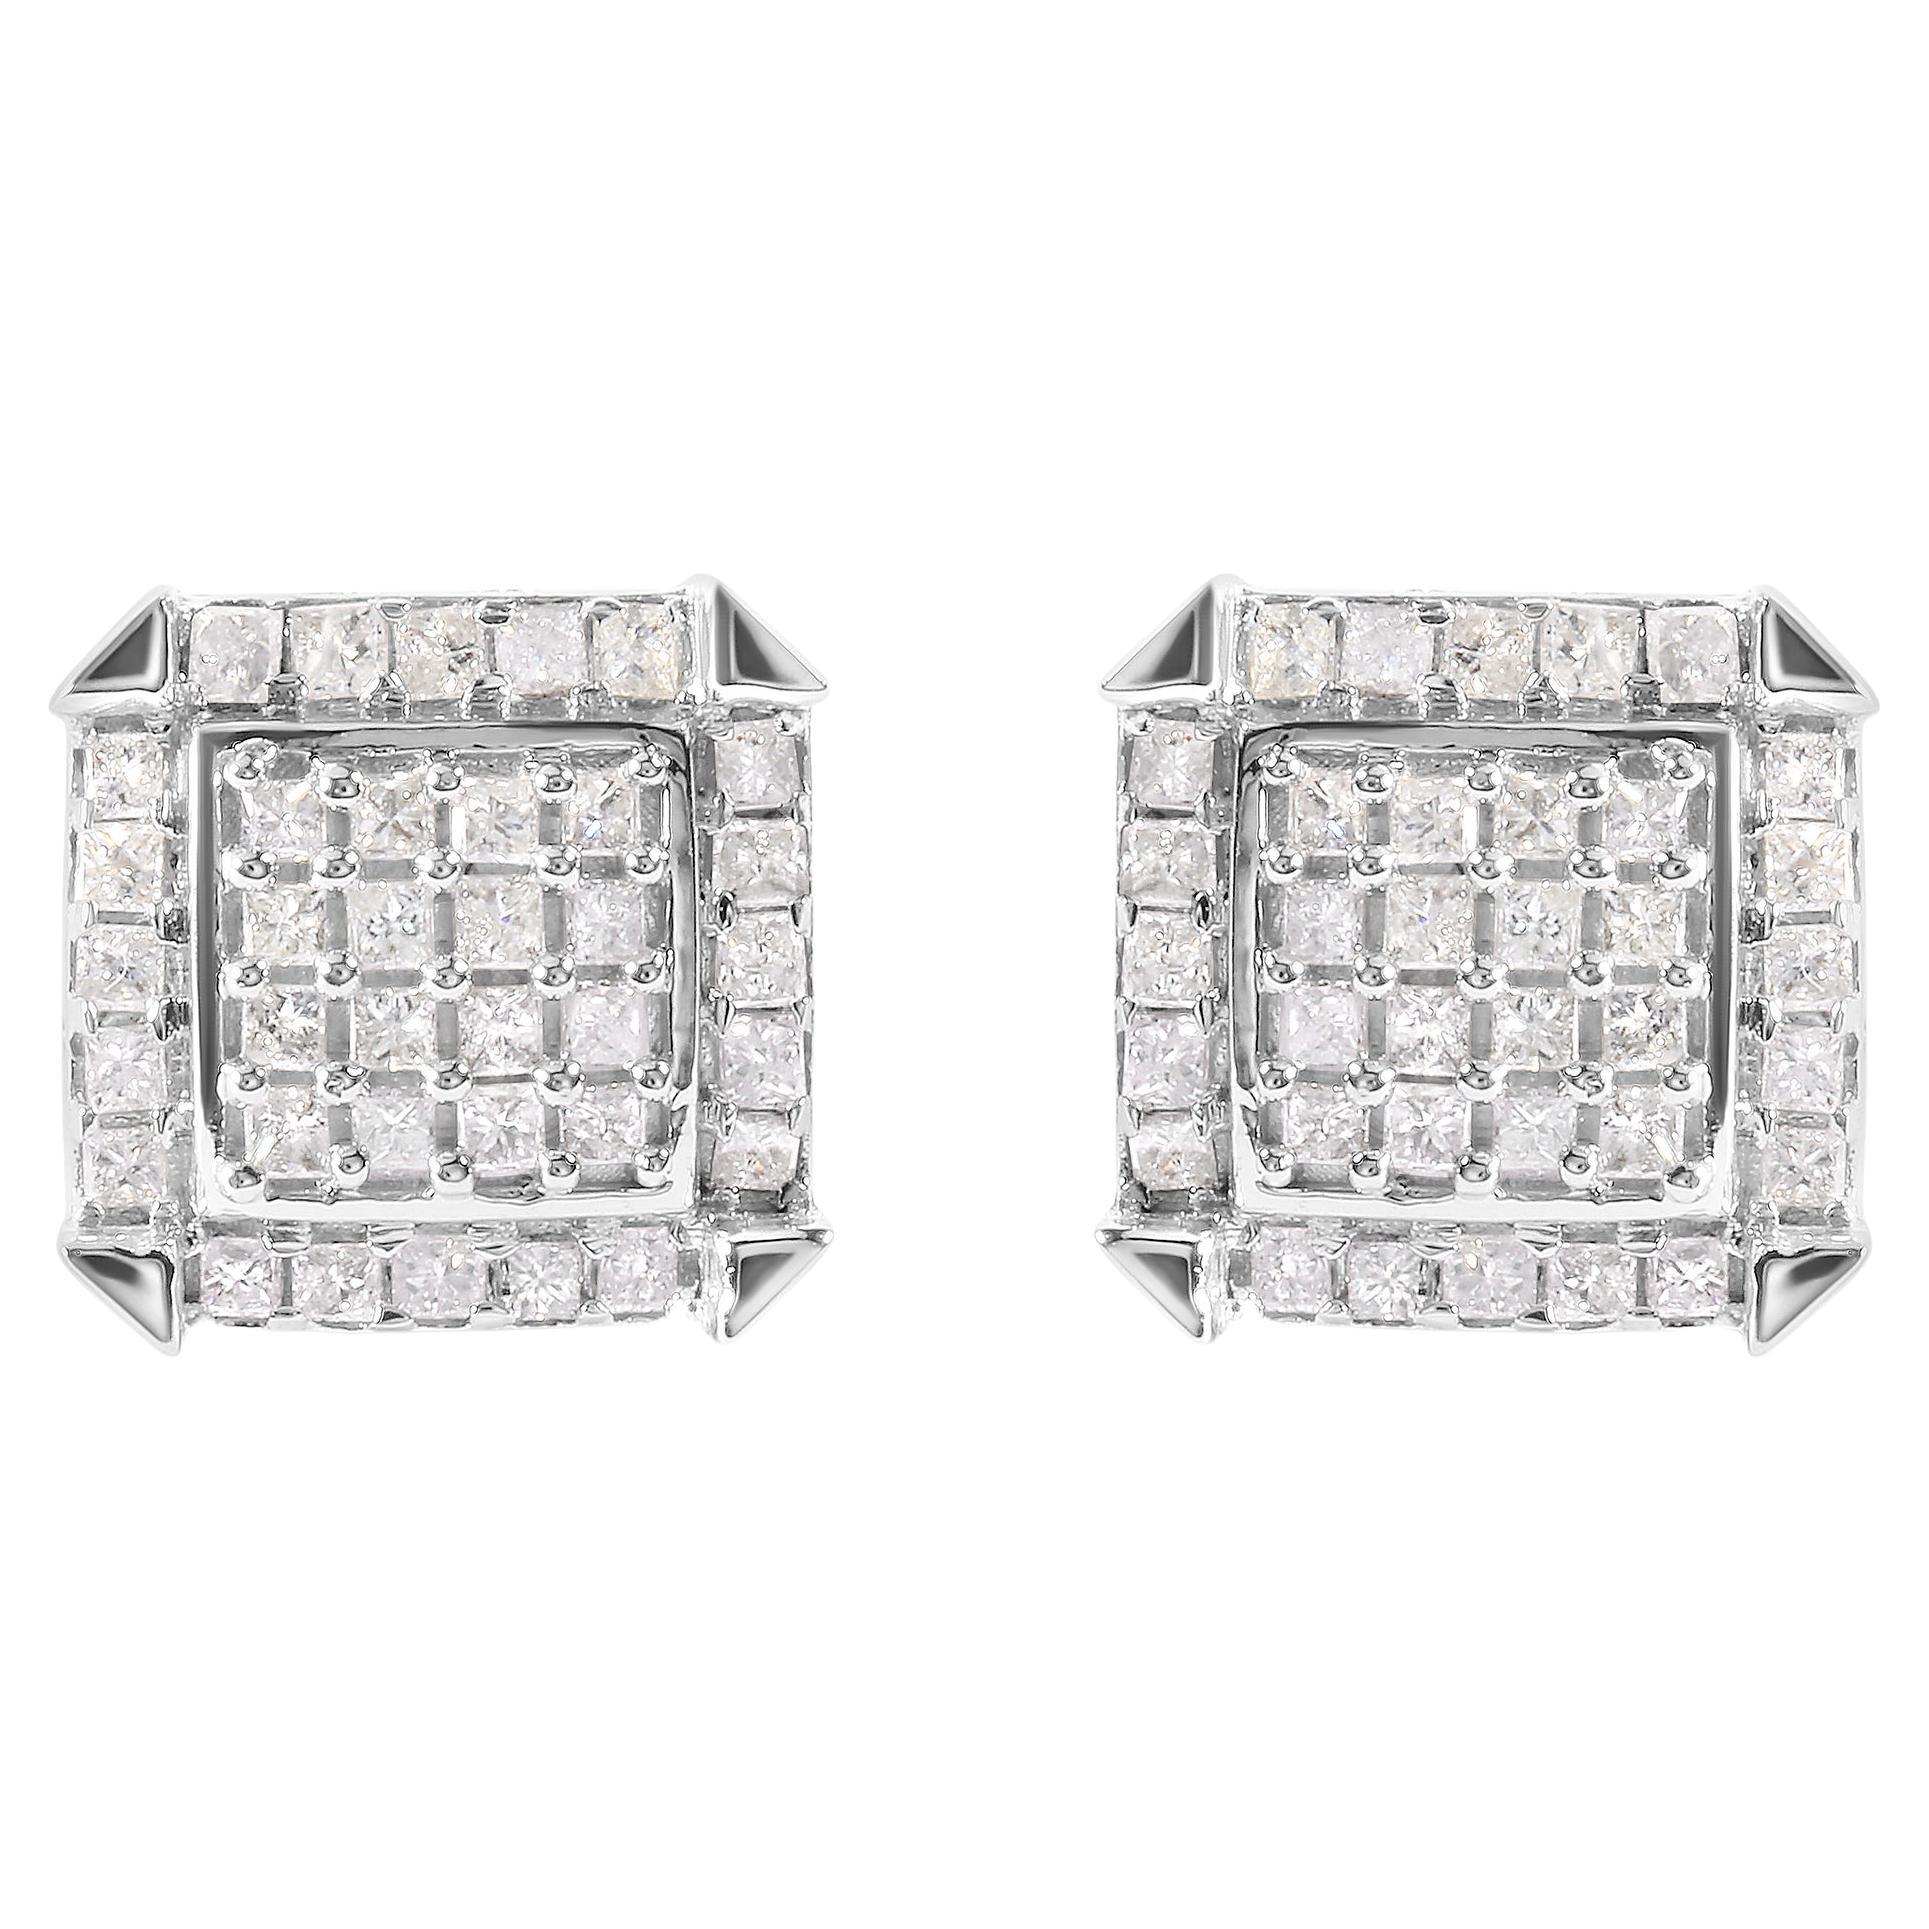 10K White Gold 1 1/10 Carat Princess Diamond Composite and Halo Stud Earrings For Sale